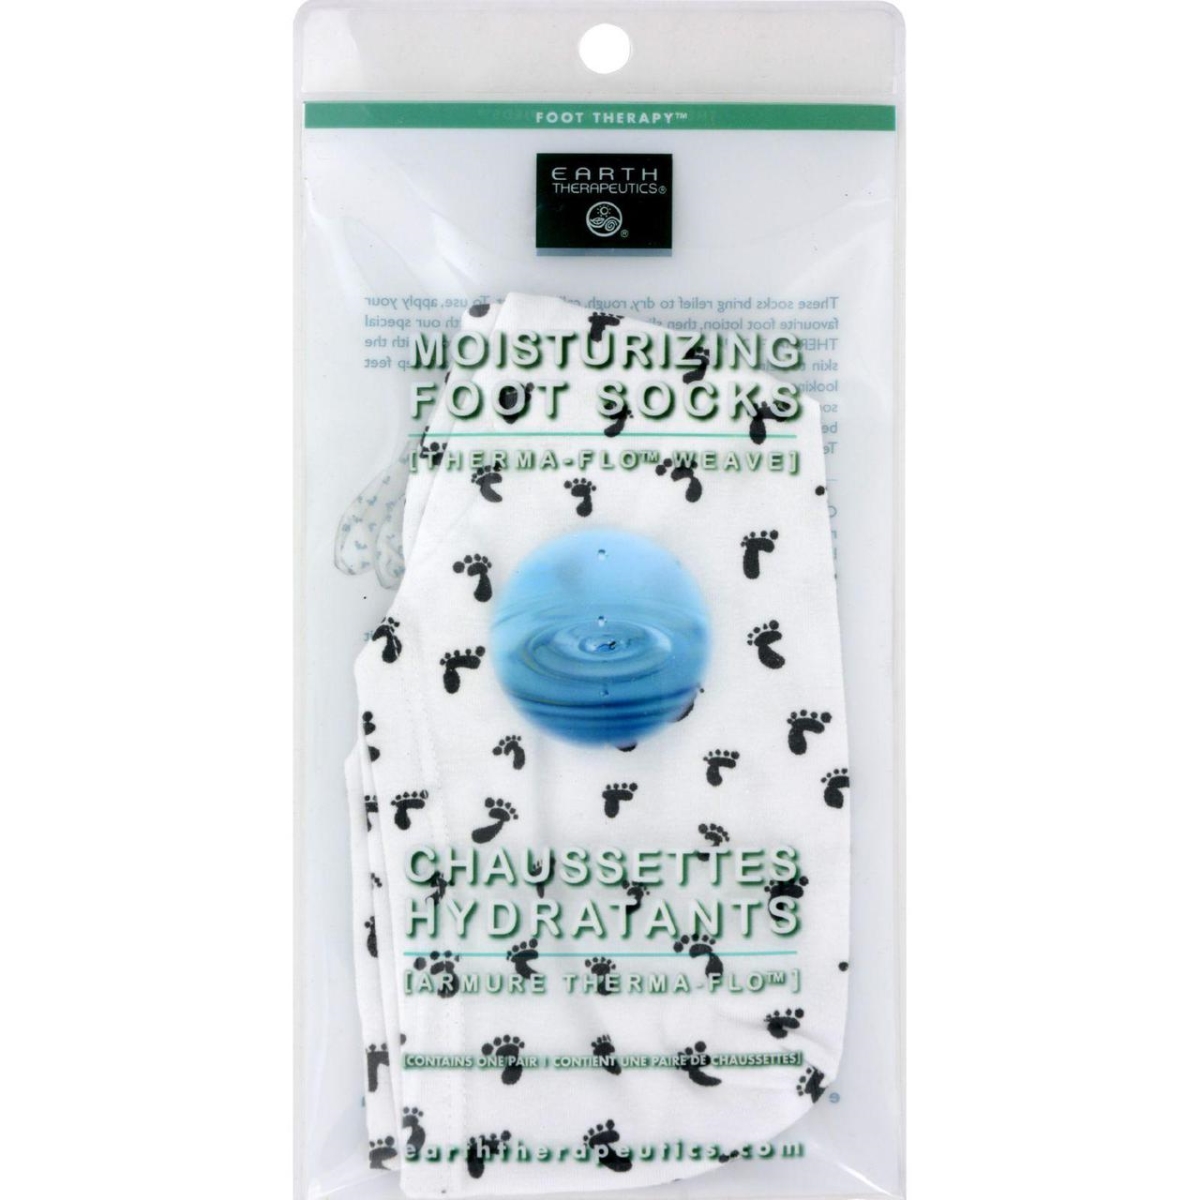 Hg0998831 Moisturizing Foot Sock, White With Footprints